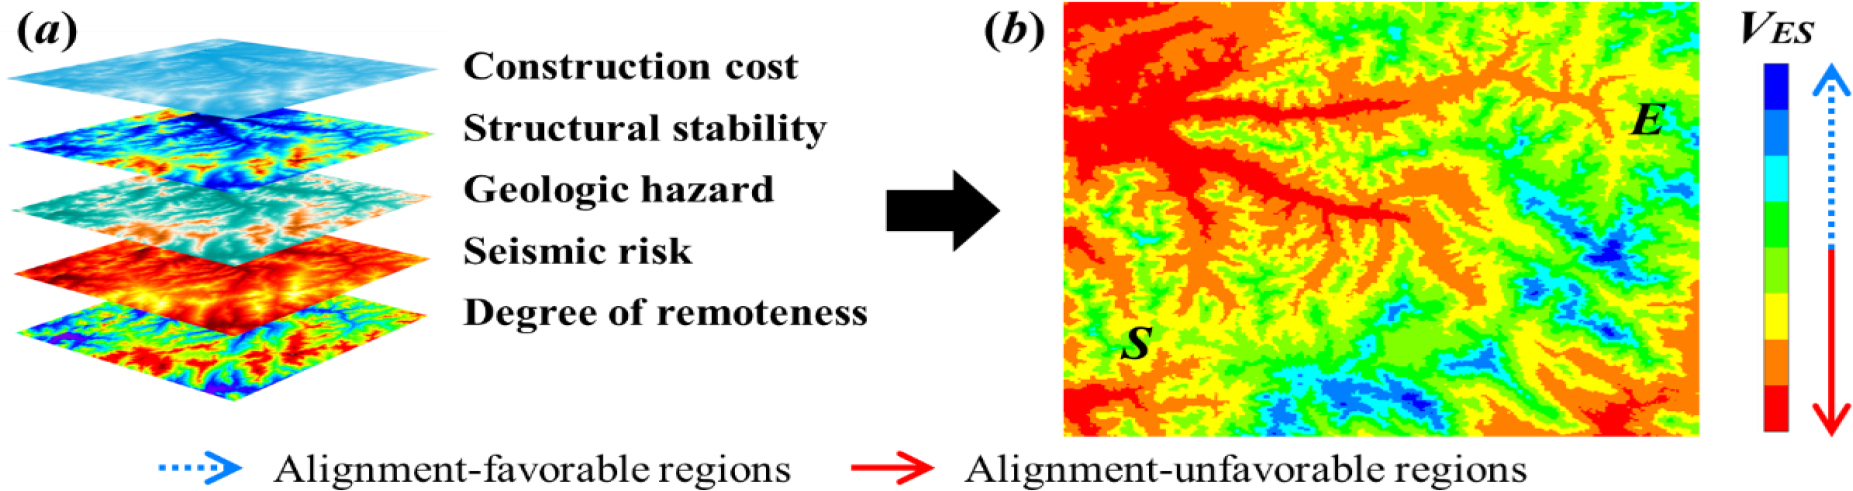 (a) Environmental suitability influential factors and (b) environmental suitability map for alignments.